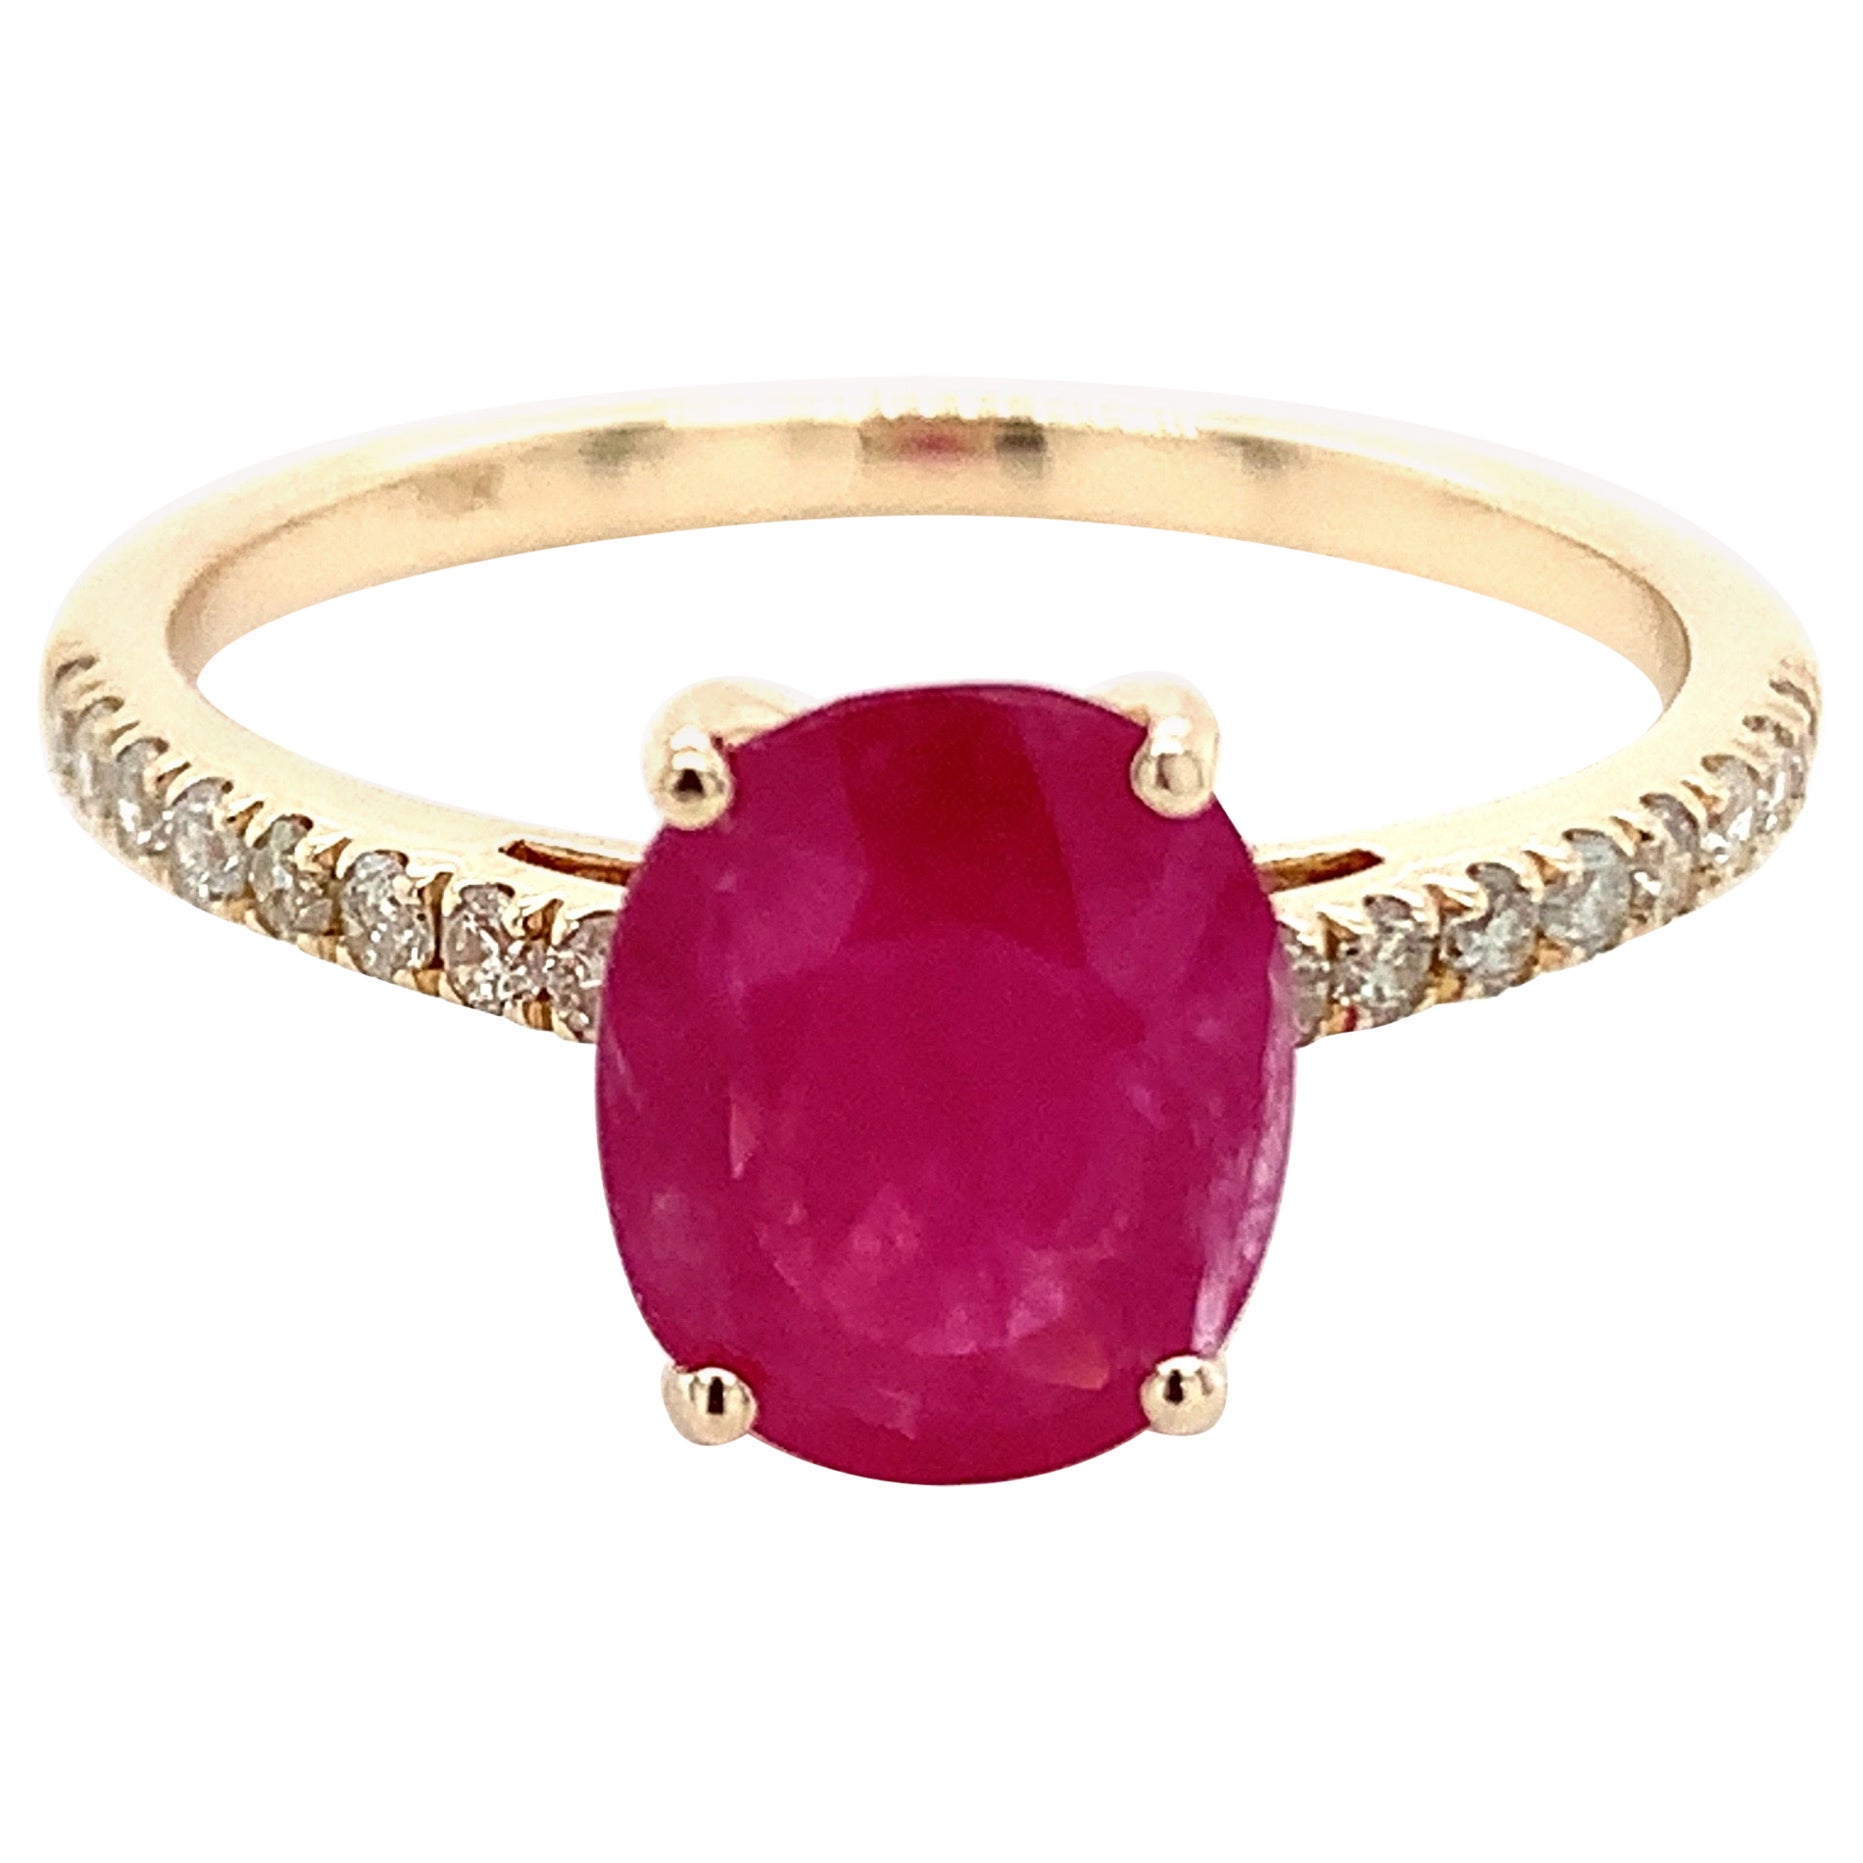 1.93 Carat Oval Shape Ruby Ring with Diamonds in 10k Yellow Gold